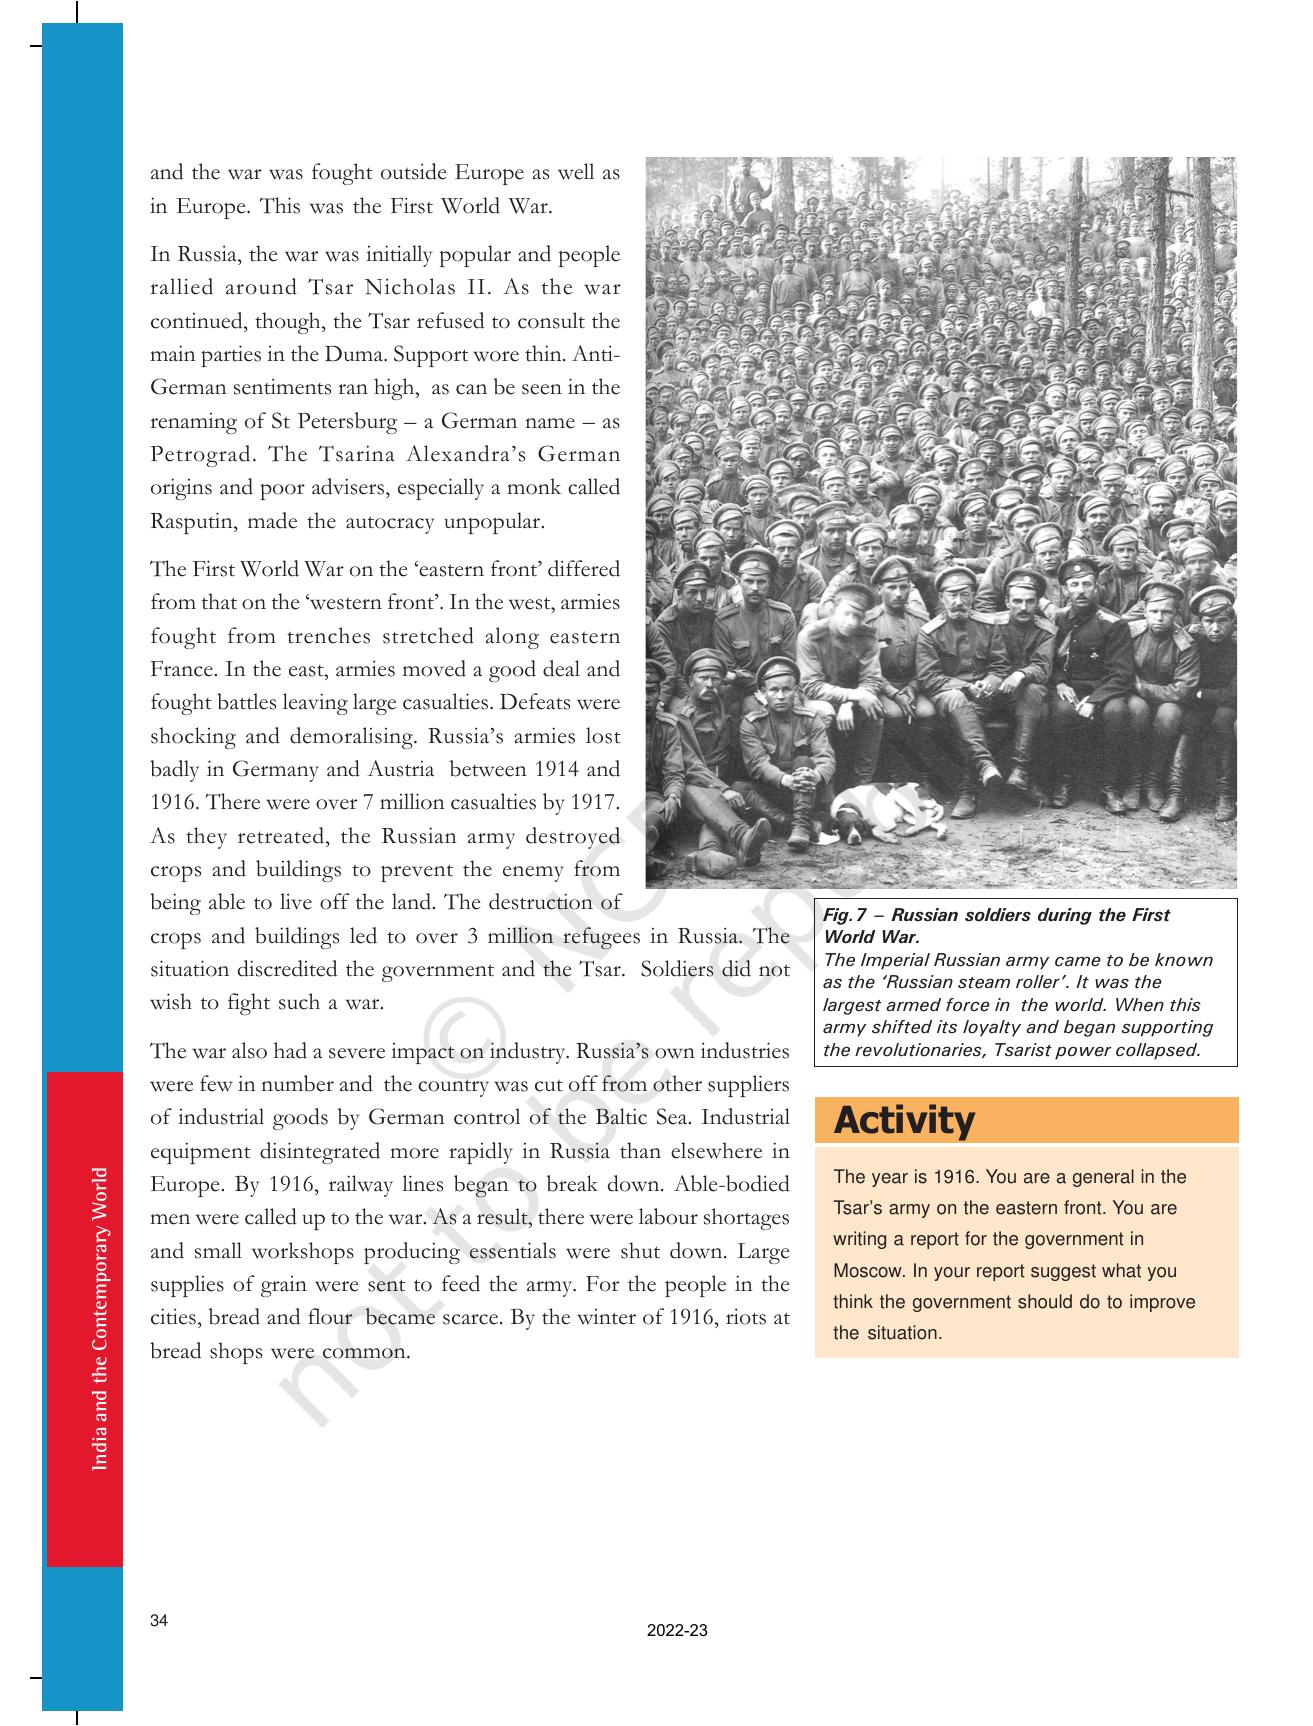 NCERT Book for Class 9 History Chapter 2 Socialism in Europe and the Russian Revolution - Page 10